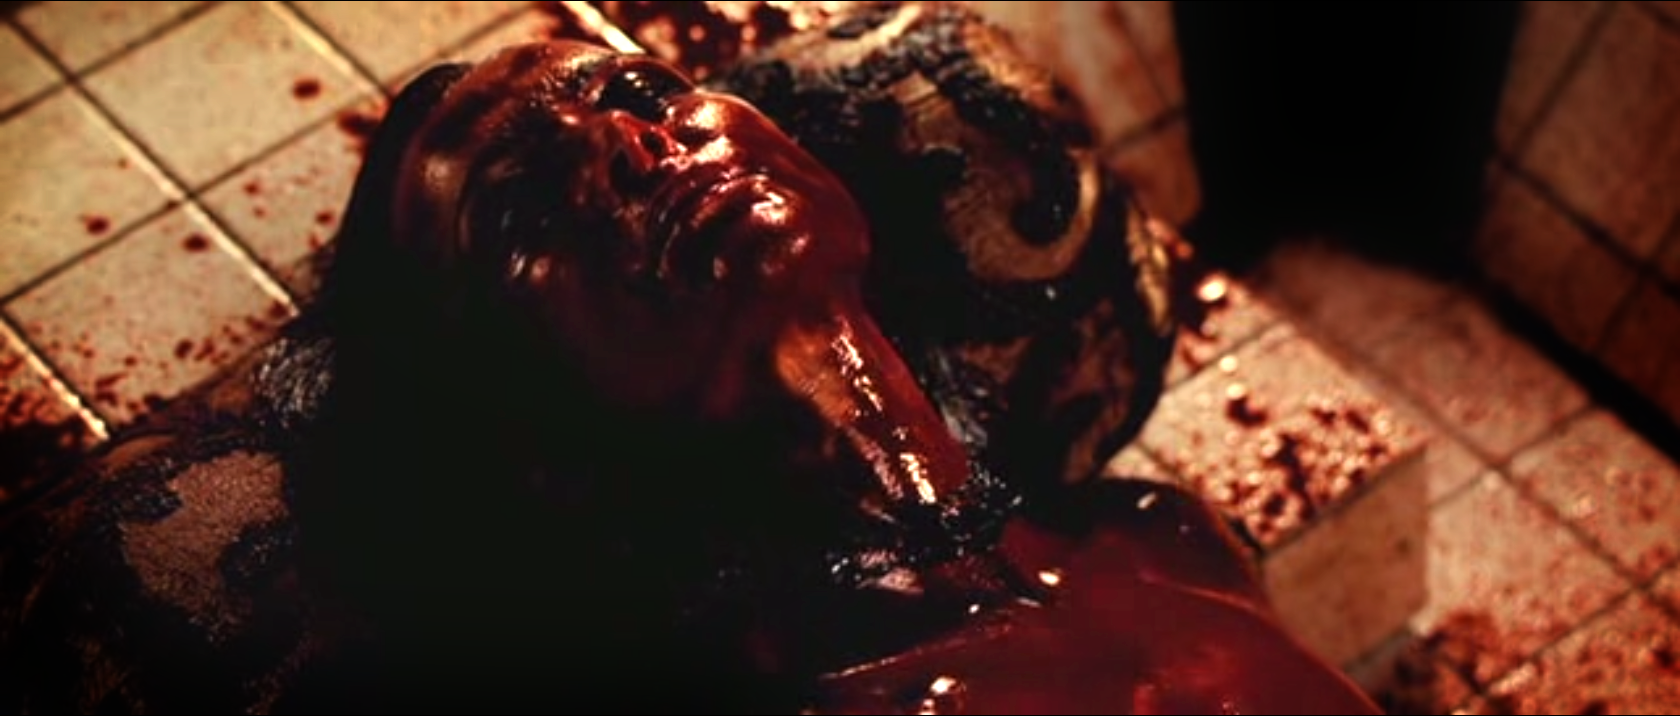 Hostel Blood Bath Scene Pc Android iPhone And iPad Wallpaper